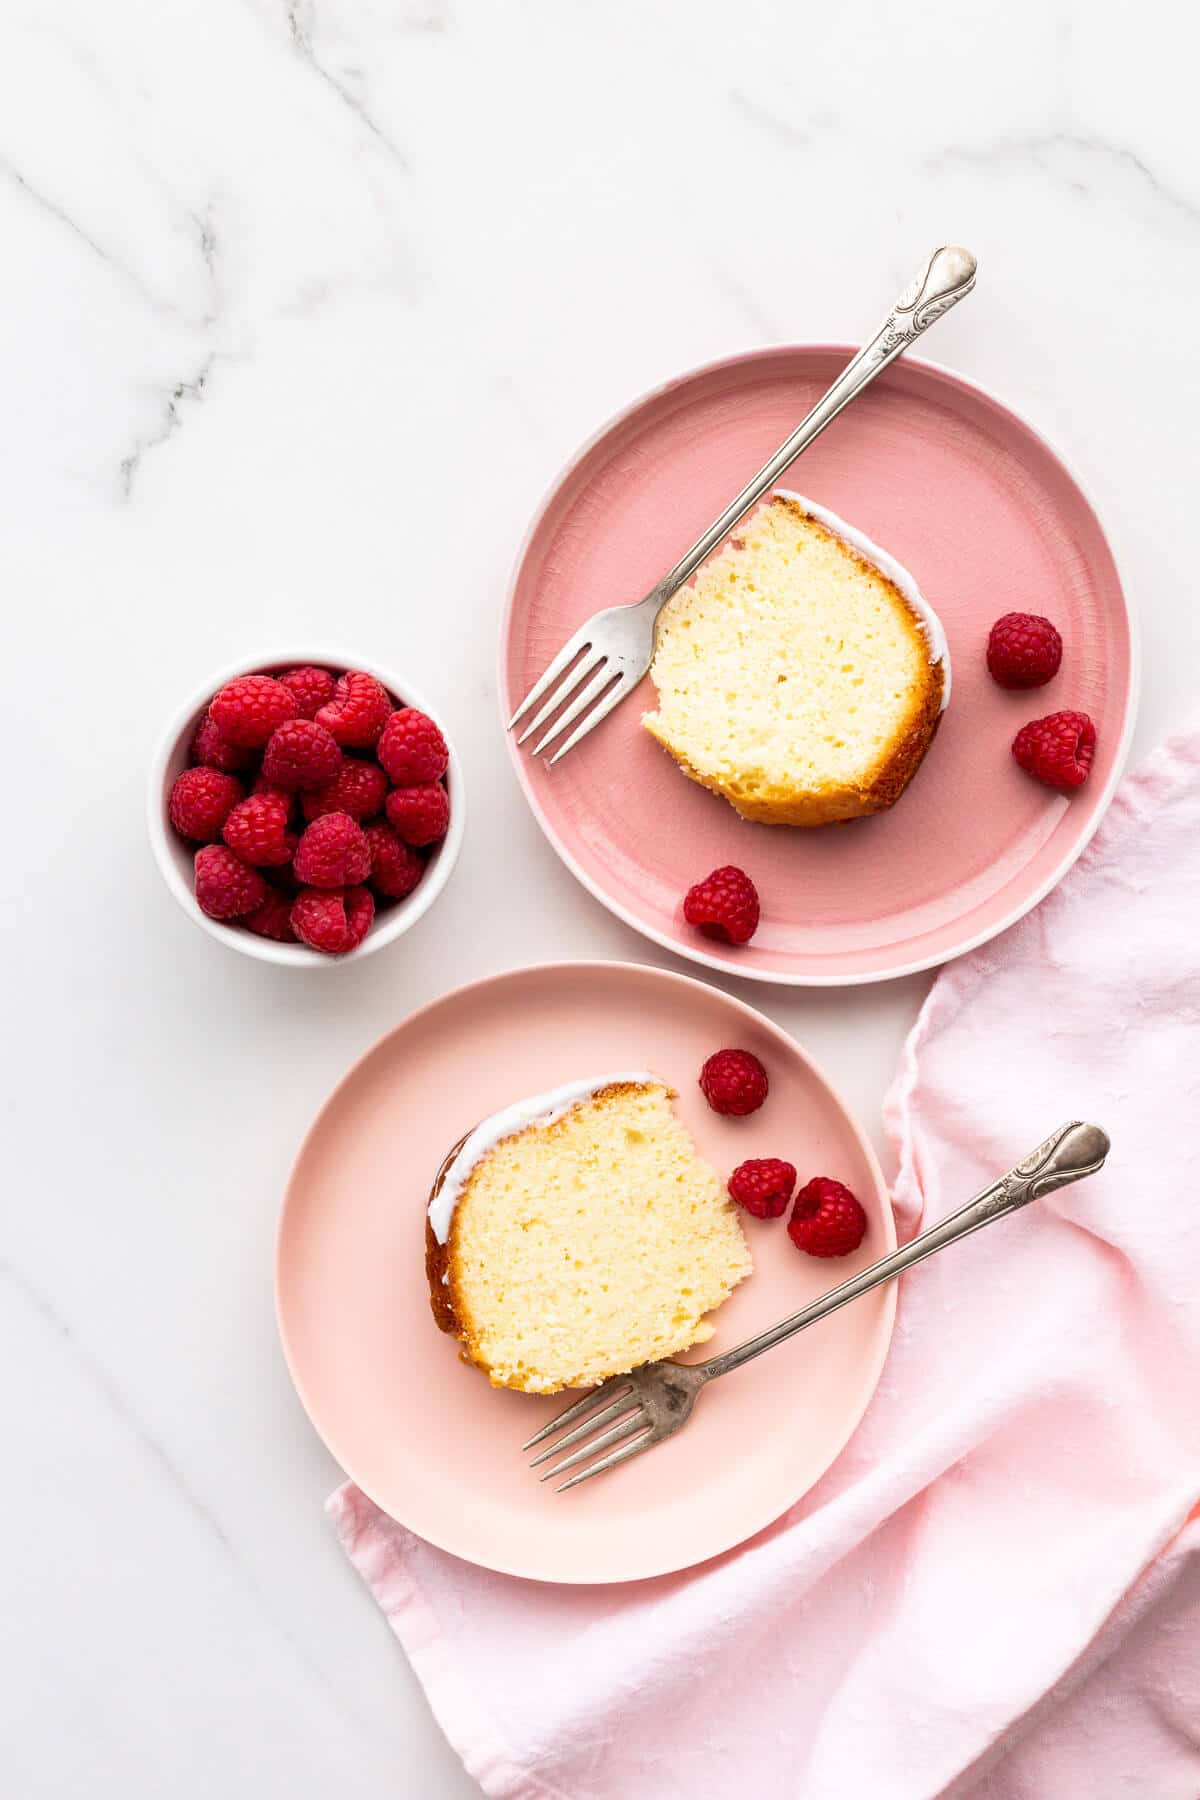 Slices of lemon cake on pink plates, served with raspberries.